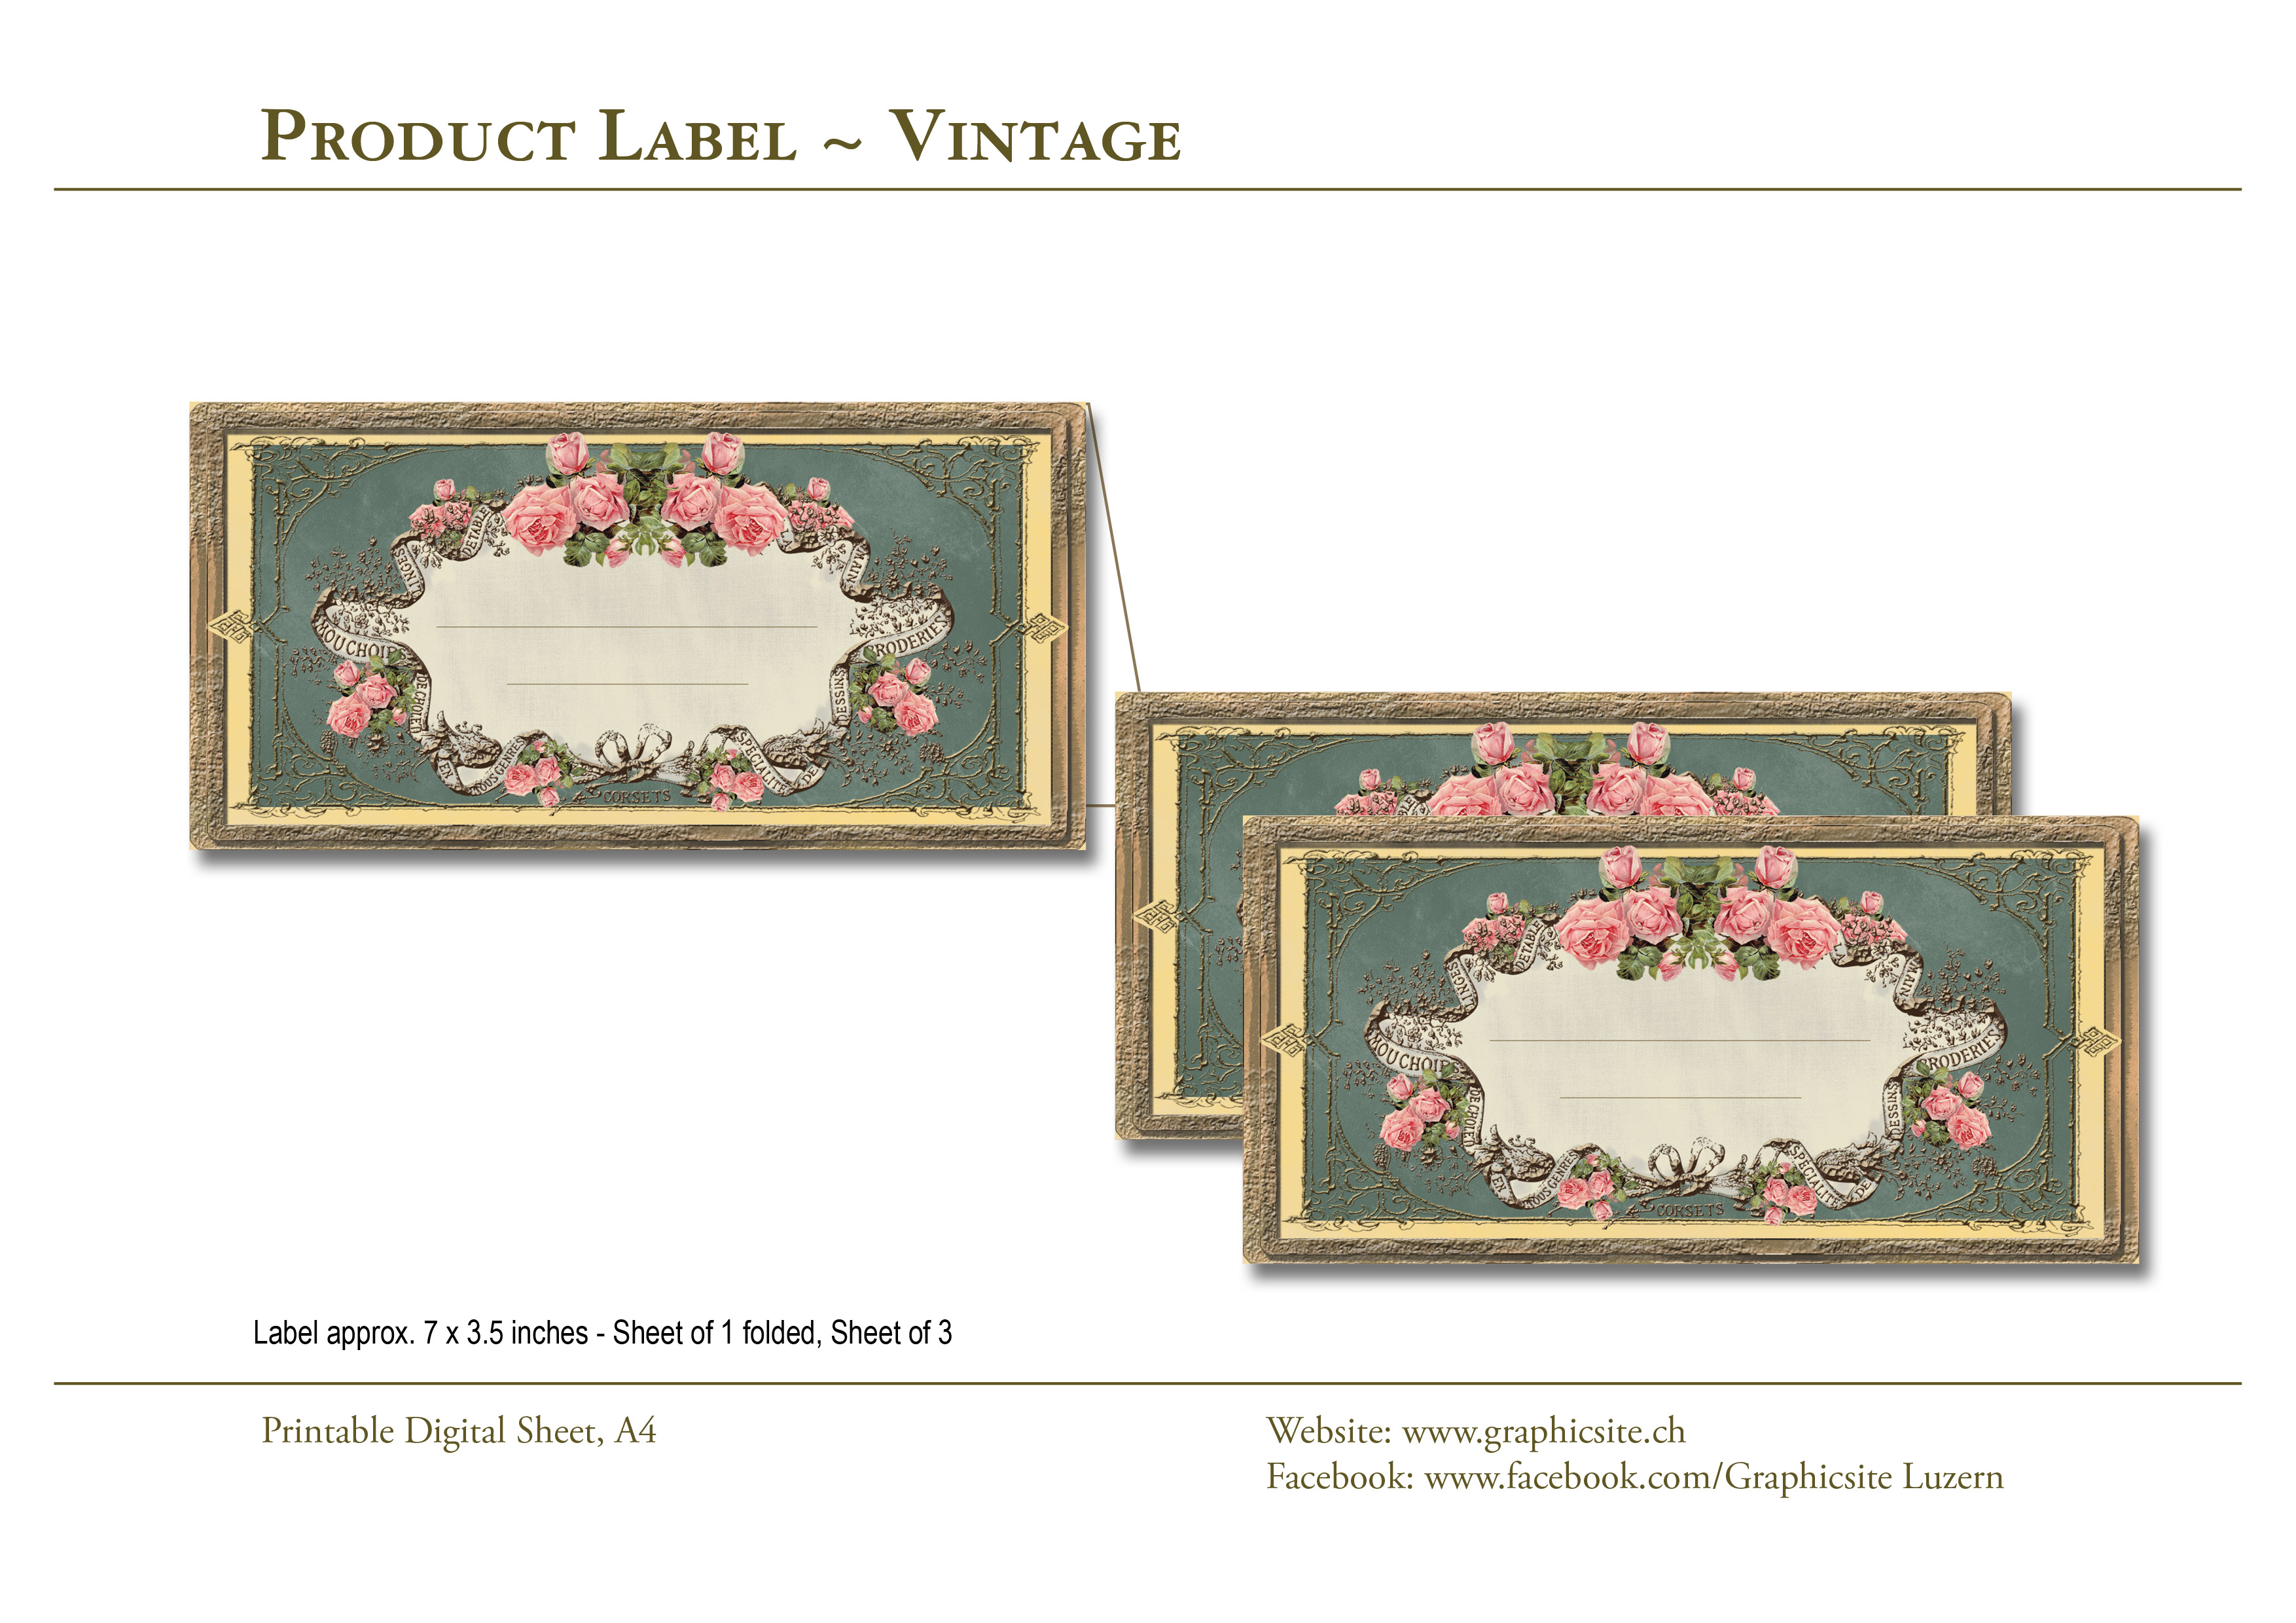 Printable Digital Sheets - Labels, Tags, Vintage, Product Label, Flowers, floral, roses, victorian, romantic, graphic design, Luzern, Schweiz,